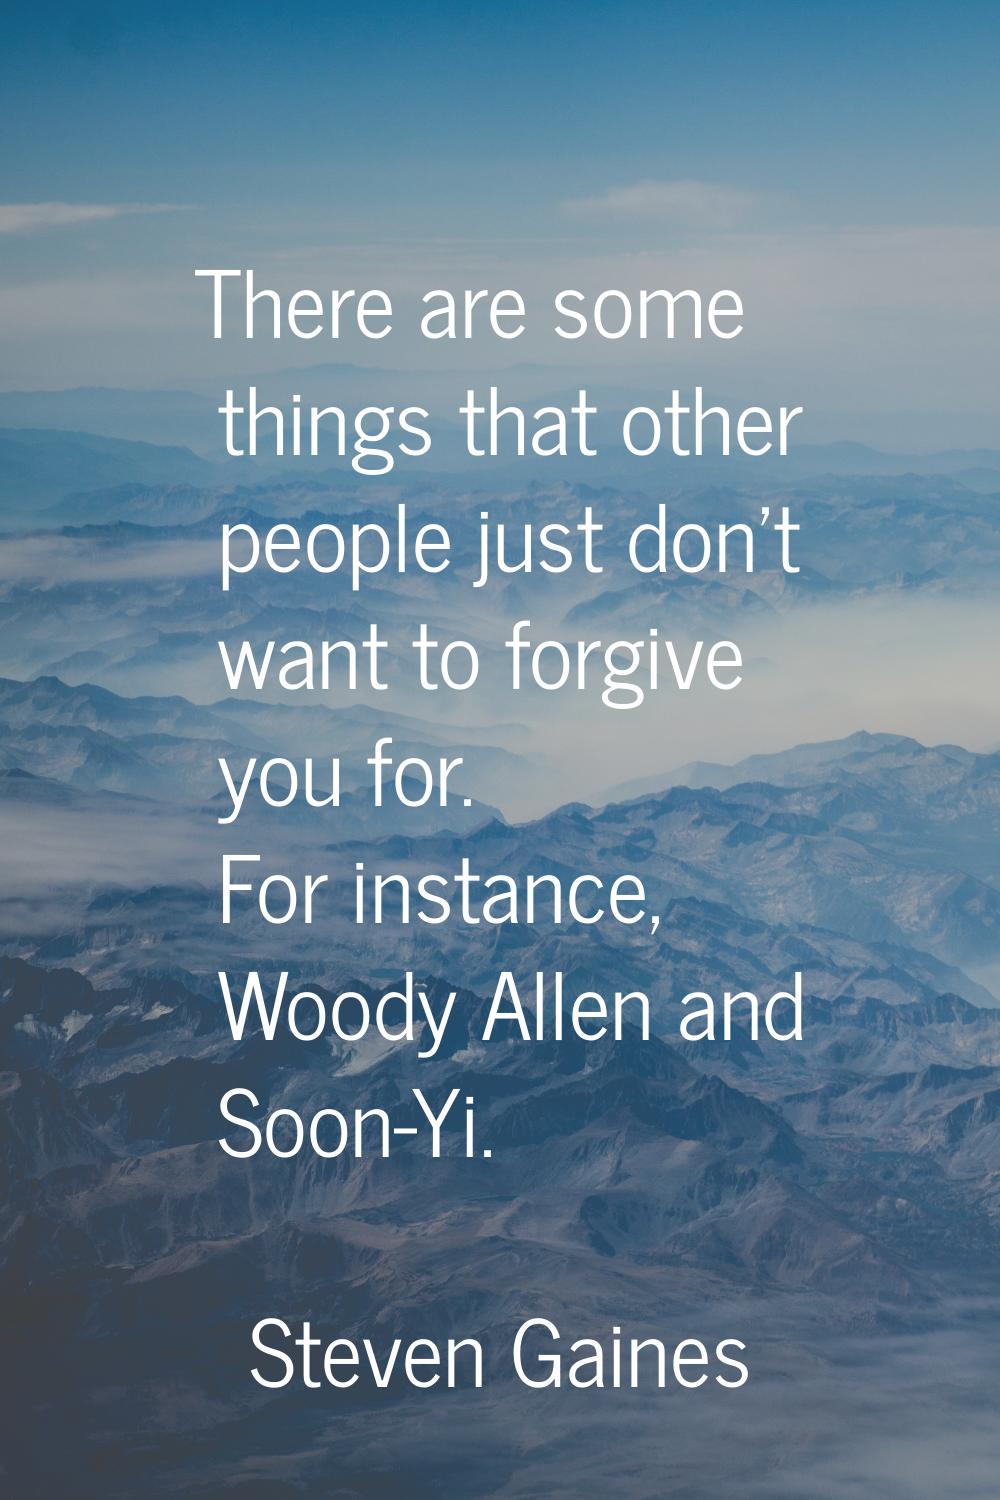 There are some things that other people just don't want to forgive you for. For instance, Woody All